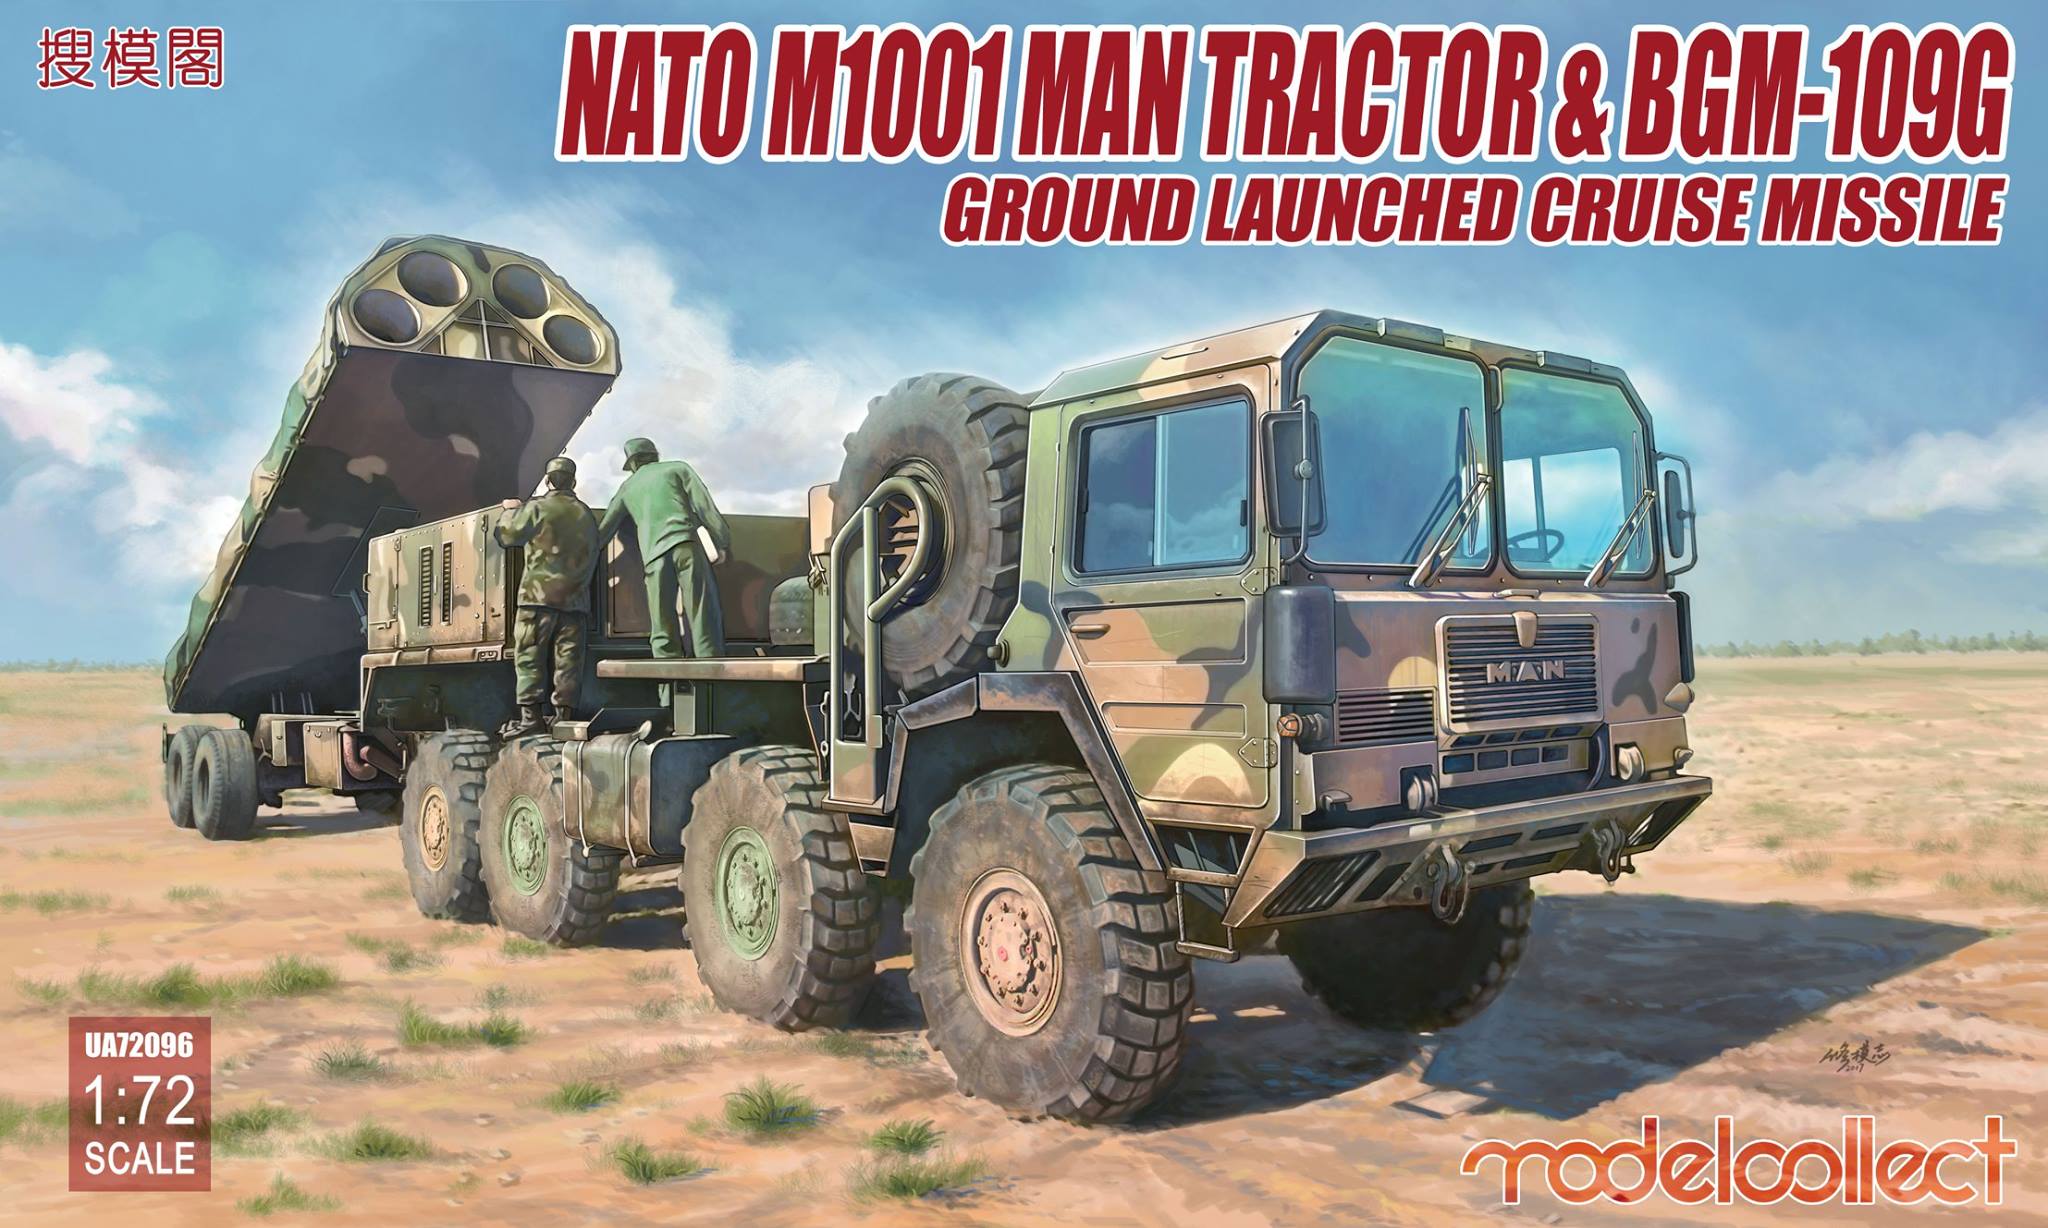 NATO M1001 MAN Tractor & BGM-109G Ground Launched Cruise Missile